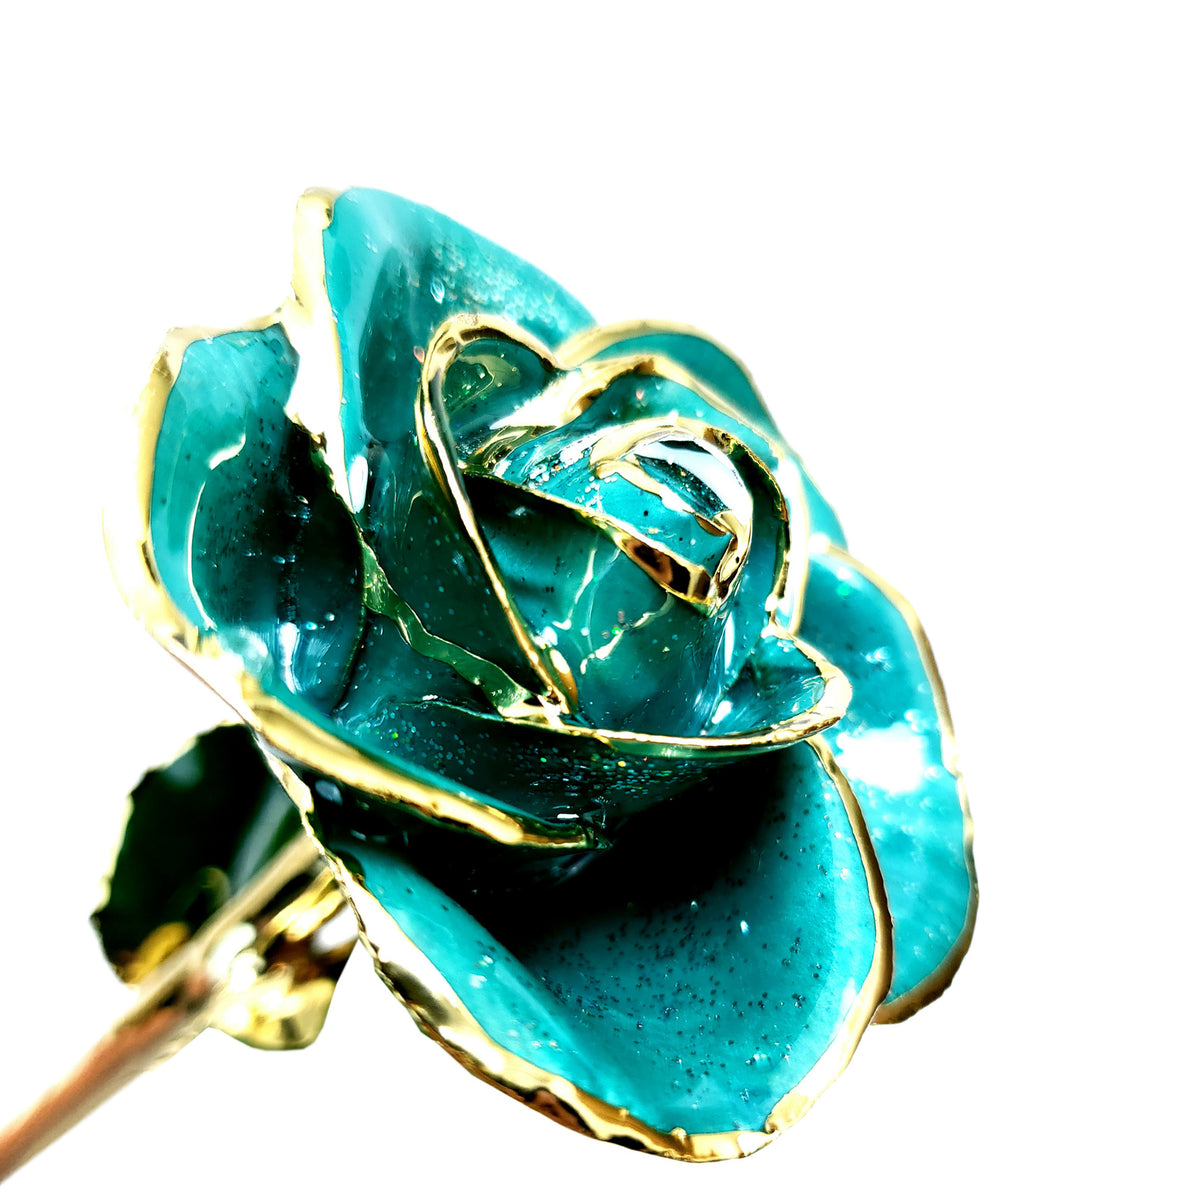 24K Gold Trimmed Forever Rose with Teal Petals with sparkles suspended in the finish. View of Stem, Leaves, and Rose Petals and Showing Detail of Gold Trim